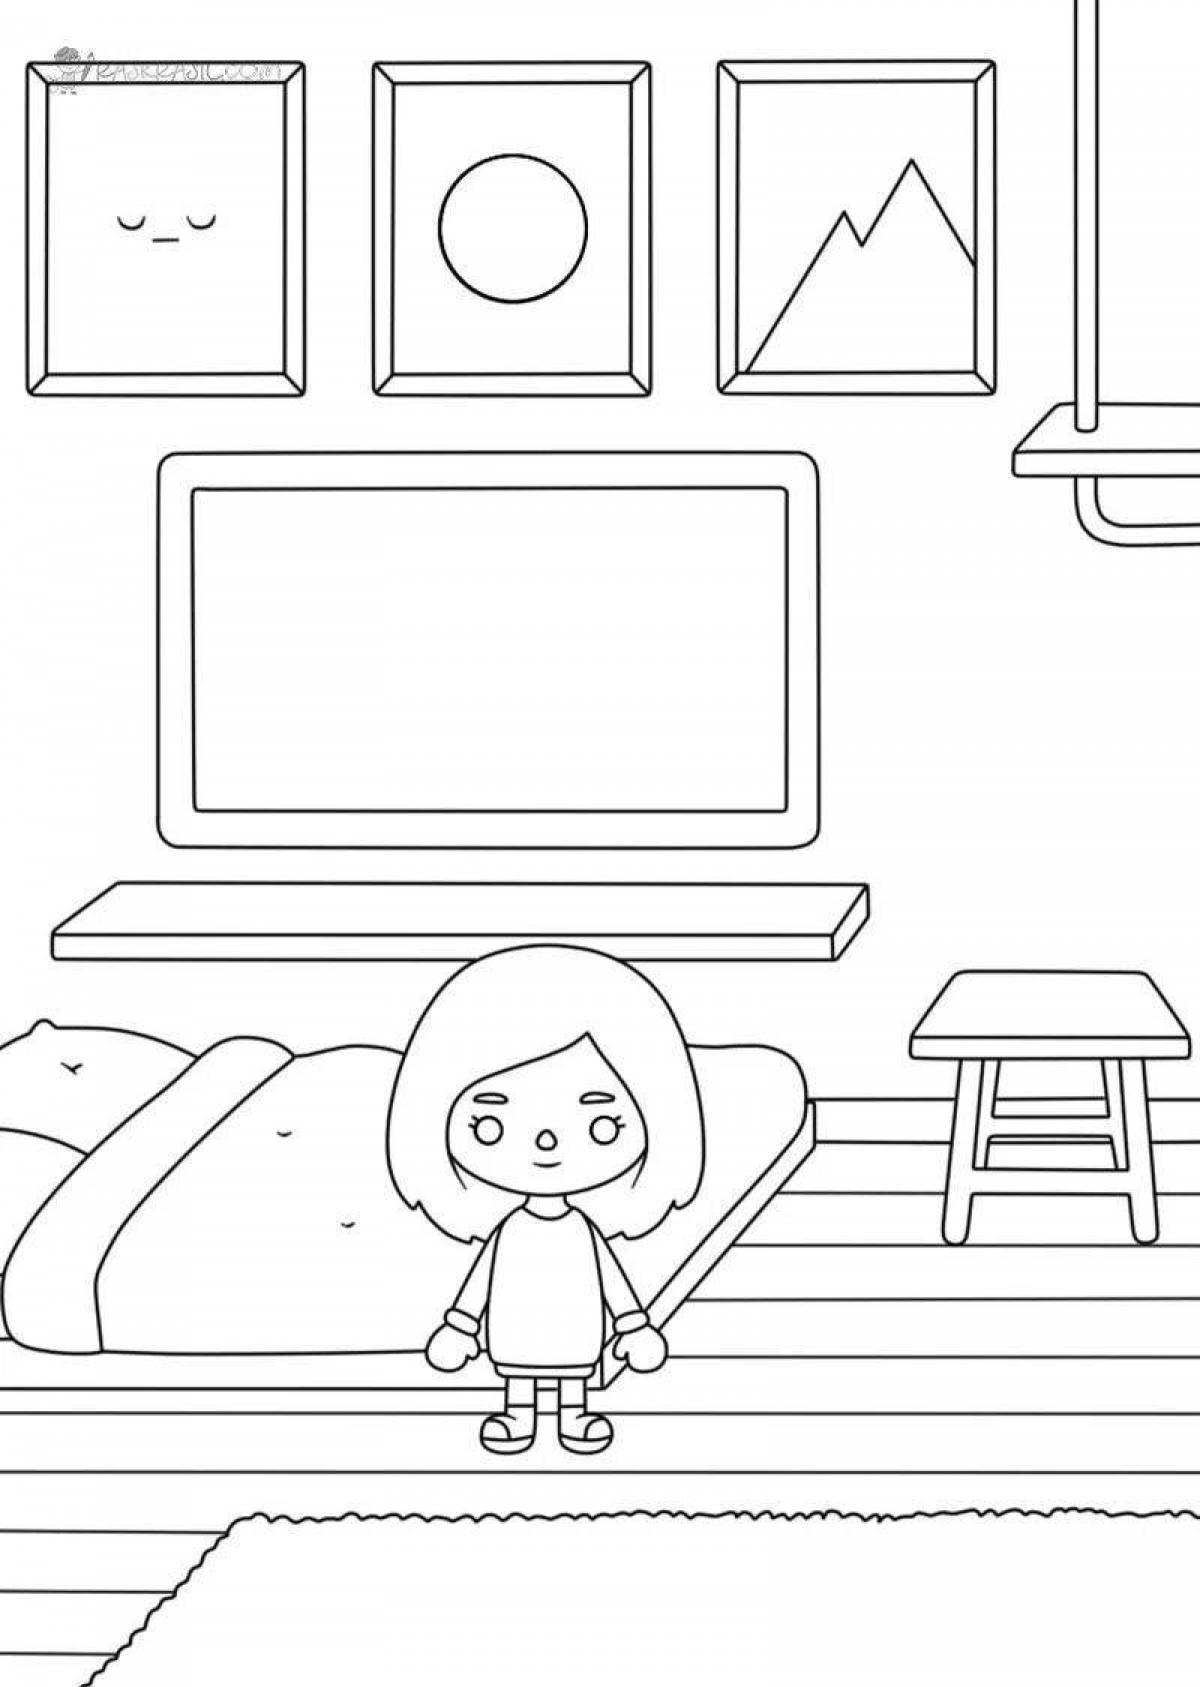 Adorable white current side coloring page